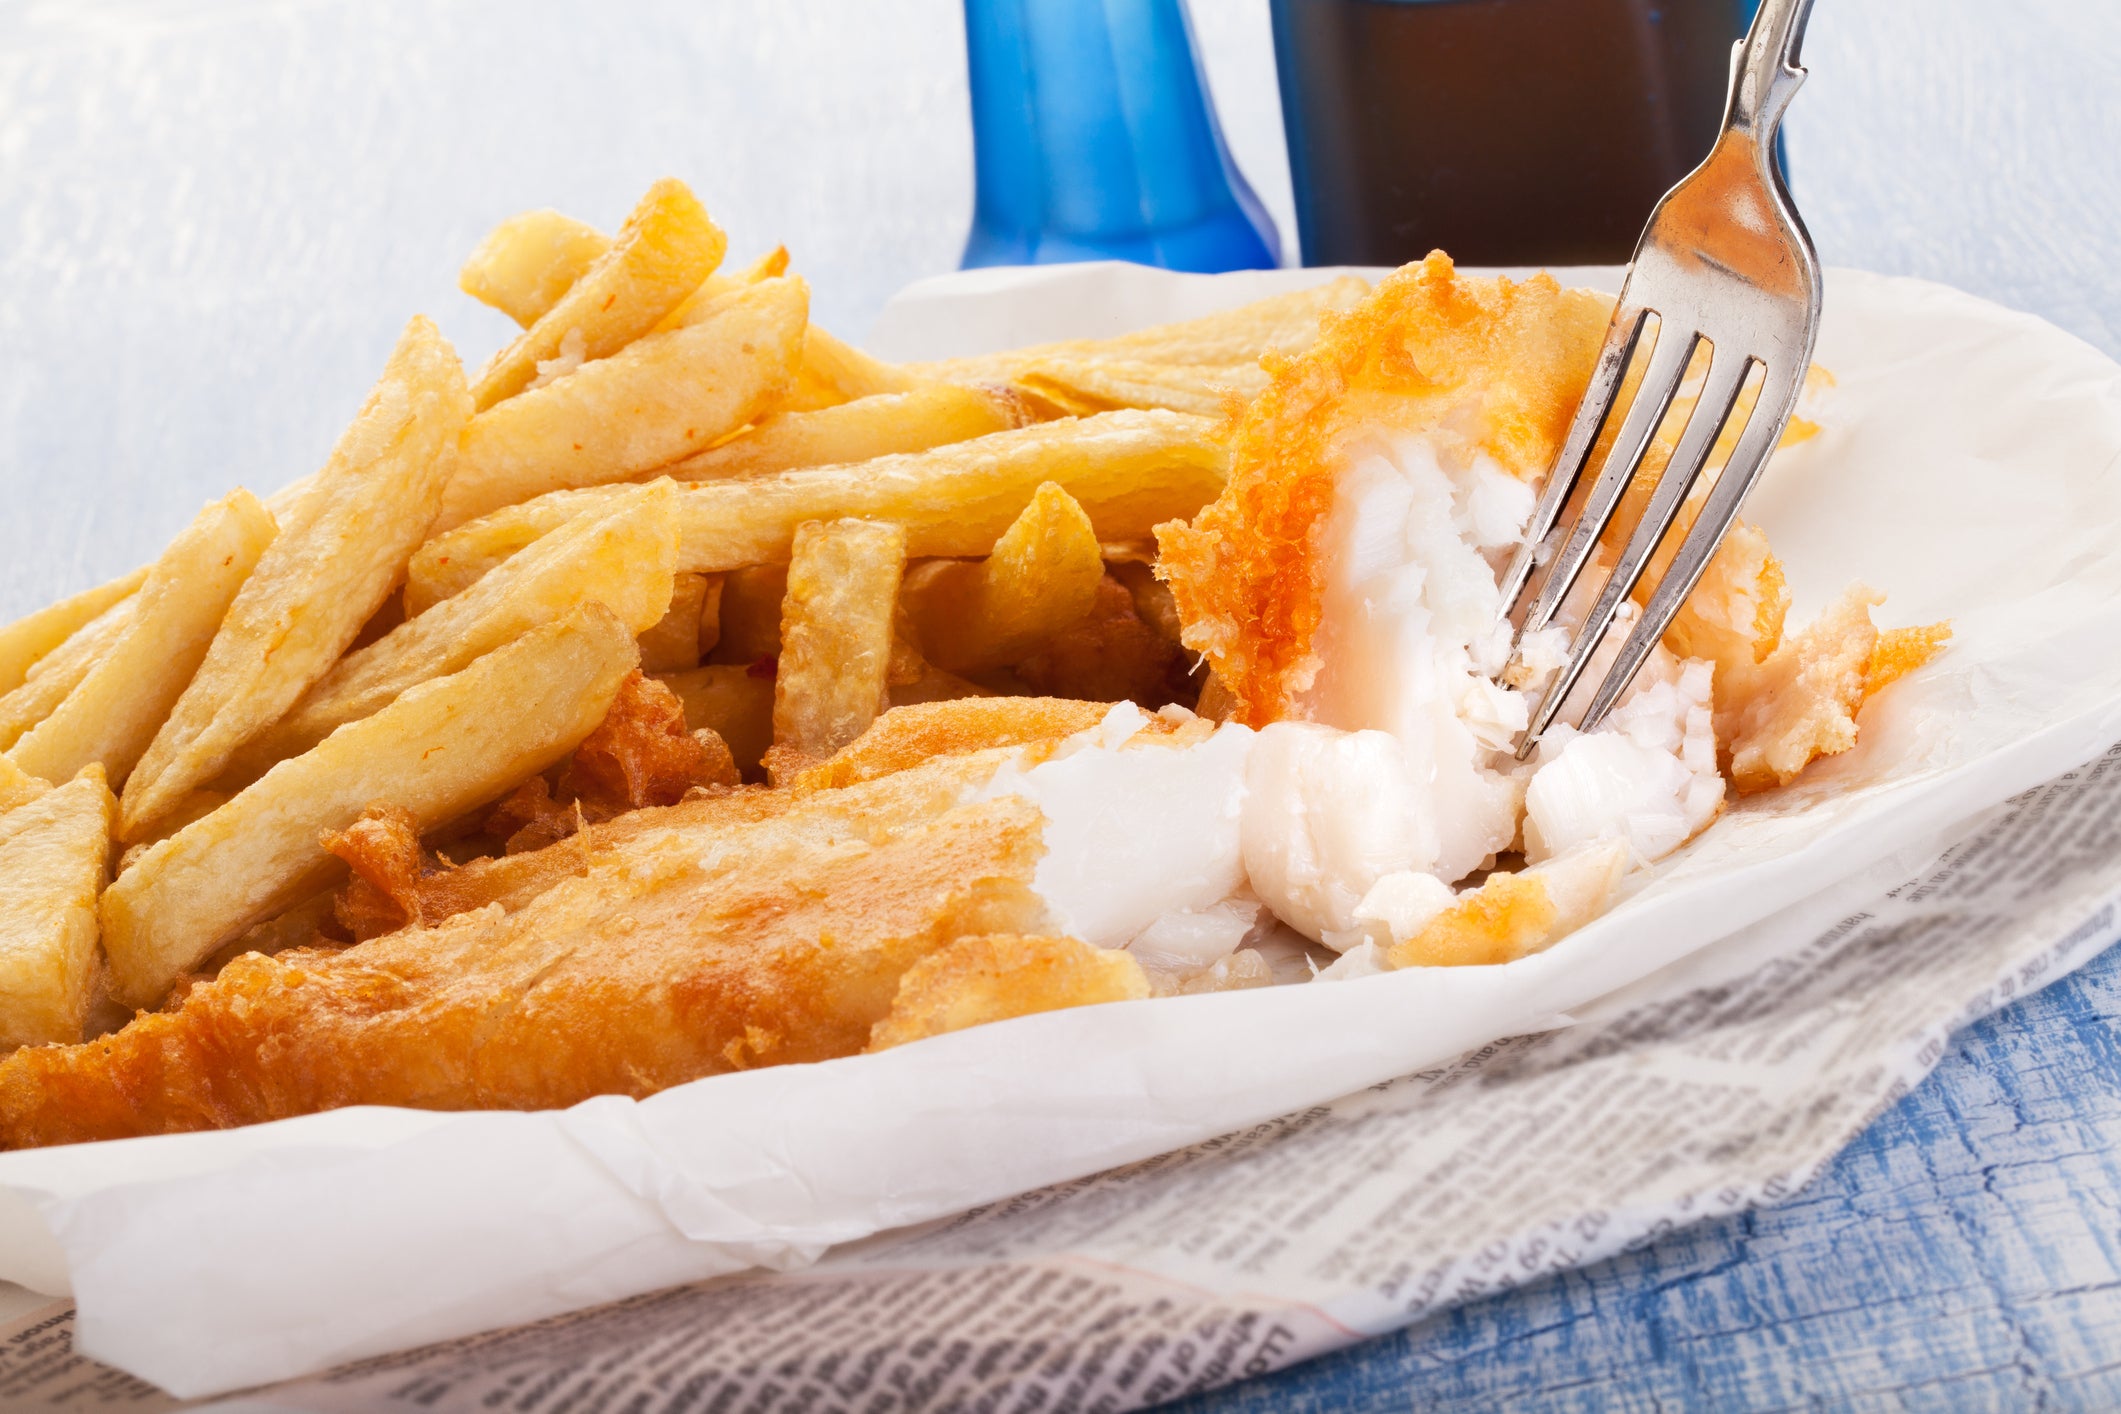 Back in 2009, fish and chip shops represented 6.4 per cent of the whole QSR market, but this figure has since dropped to 5.6 per cent